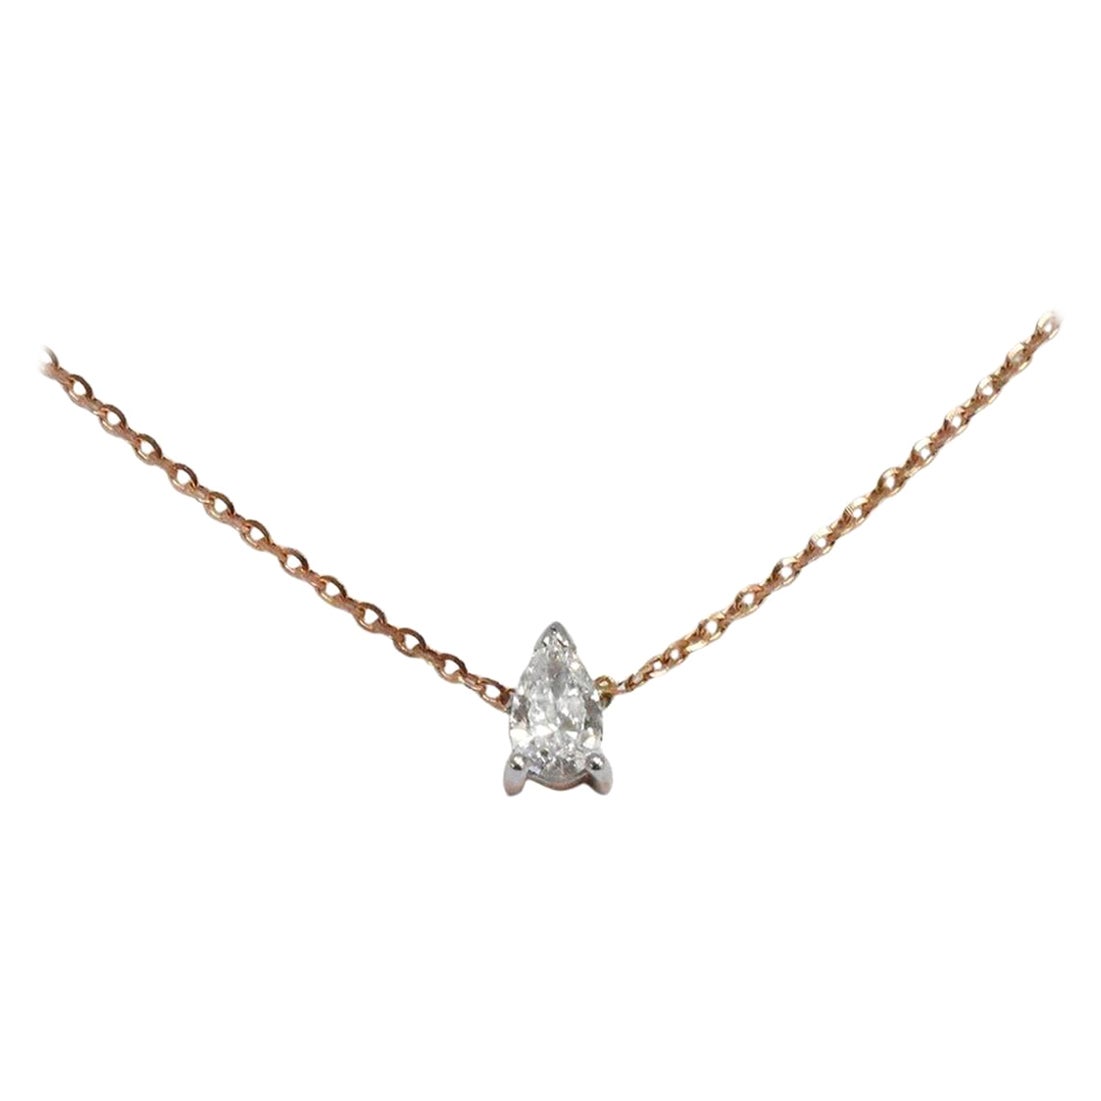 Pear Shaped Diamond Necklace made of 18k solid gold available in three colors of gold, Rose Gold / White Gold / Yellow Gold.

Natural genuine round cut diamond each diamond is hand selected by me to ensure quality and set by a master setter in our